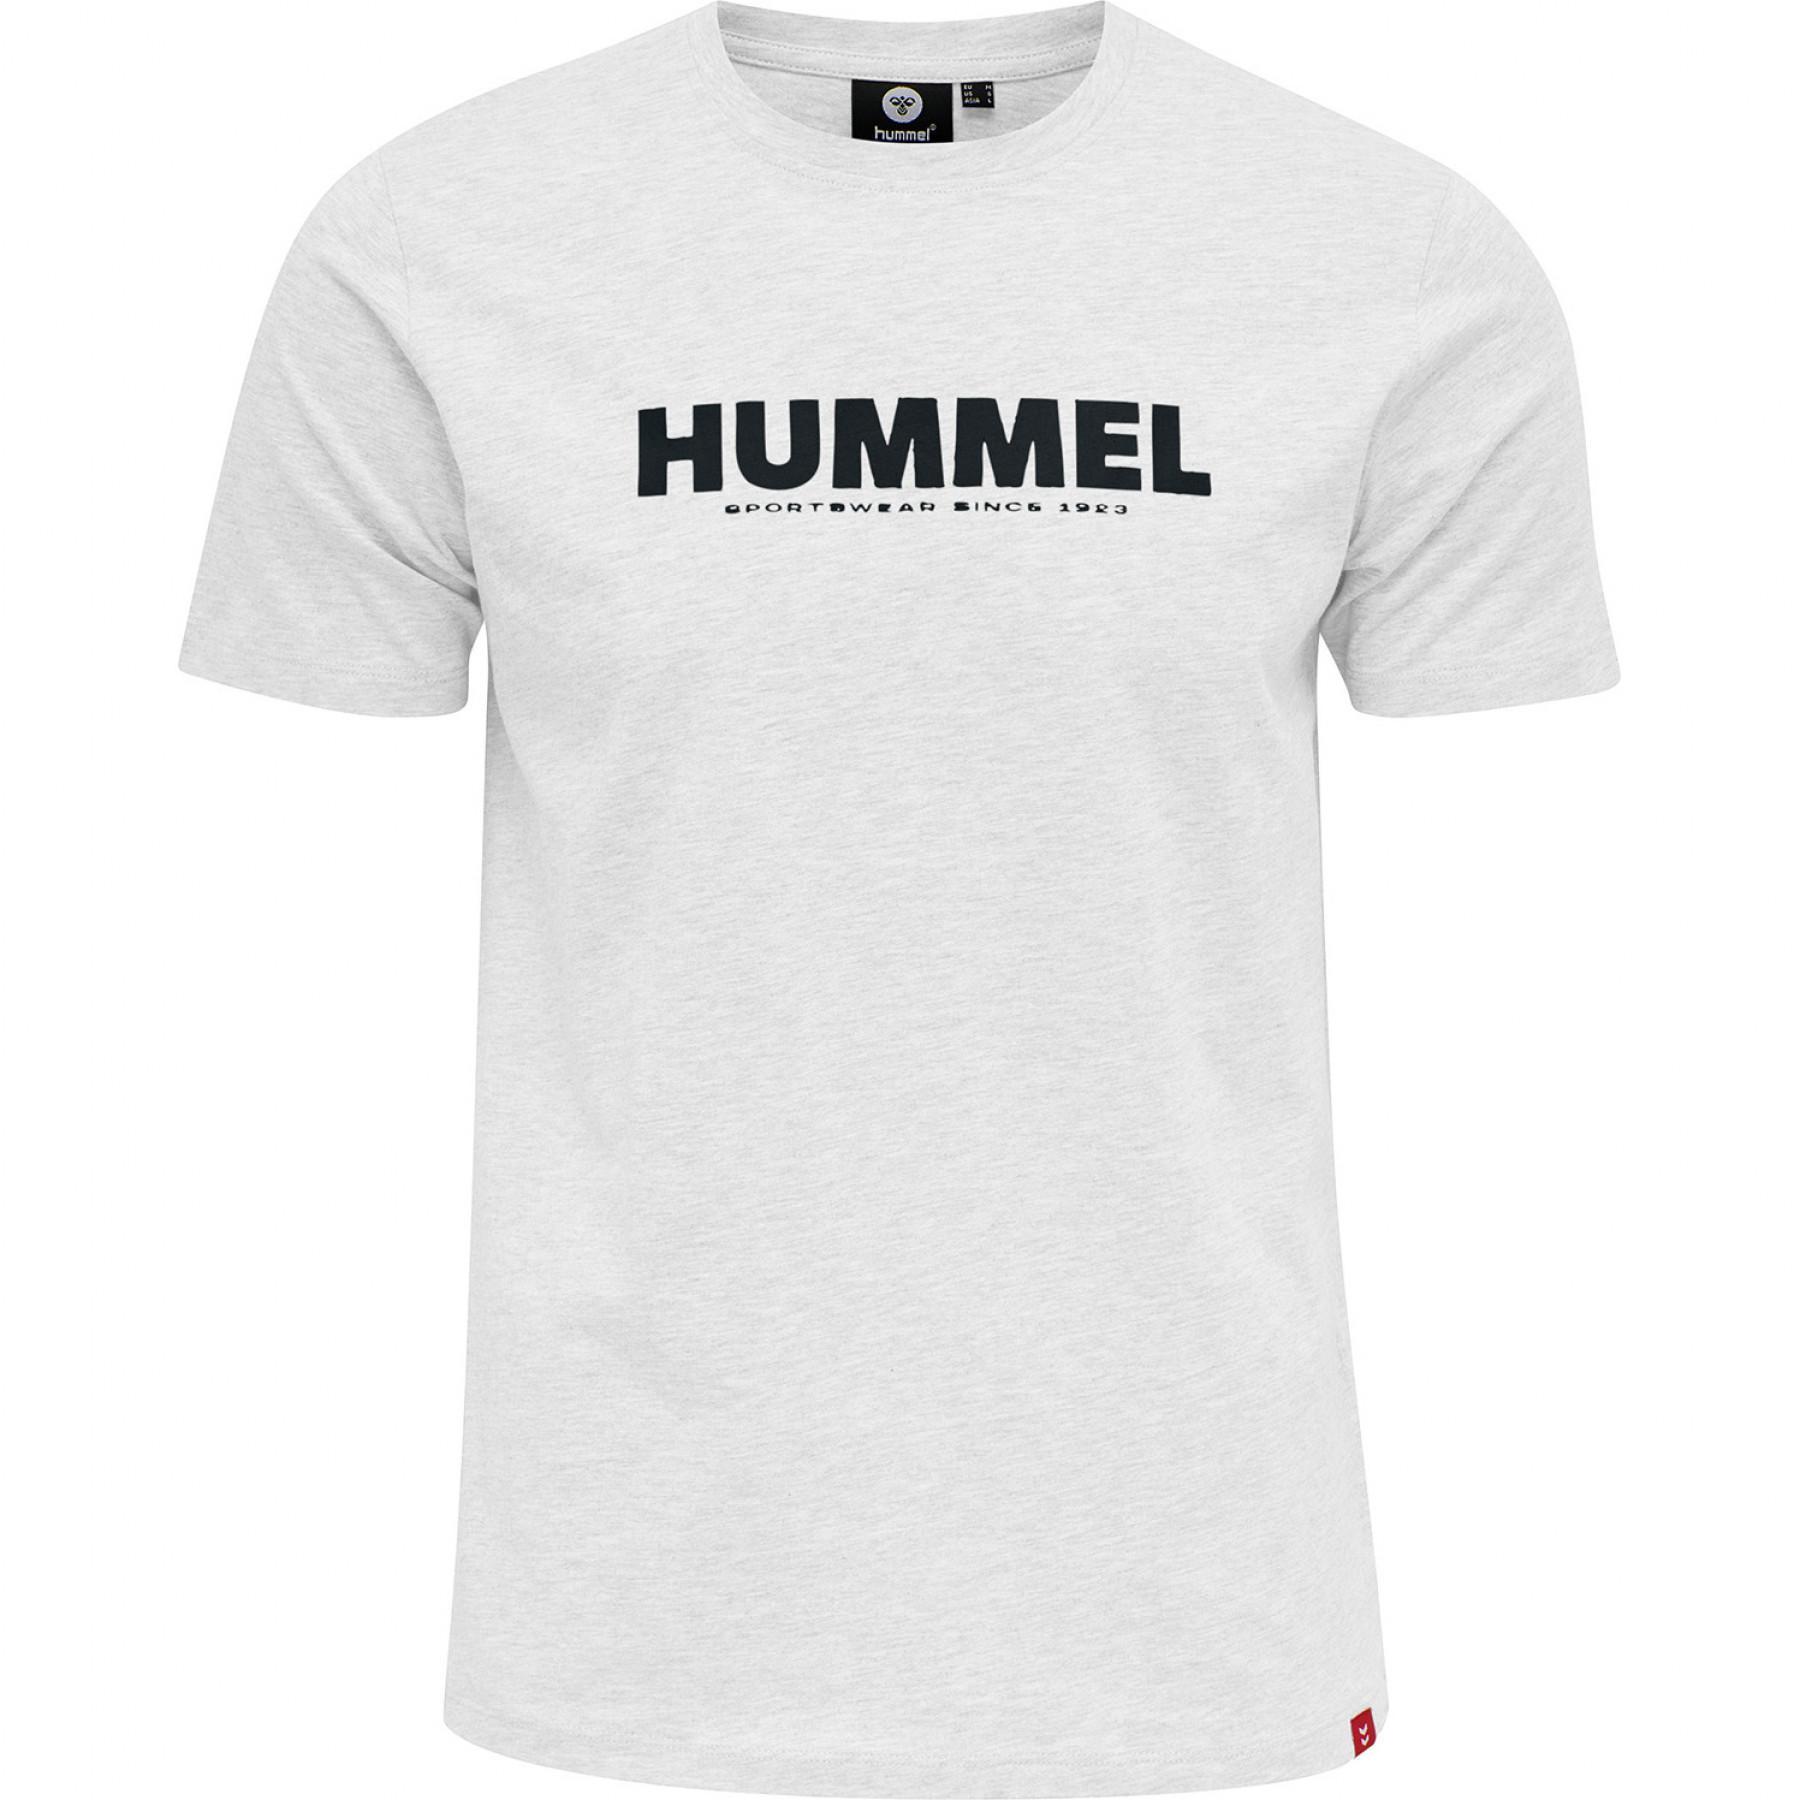 Table hmllegacy T-shirts Textile polos - T-shirt Hummel - tennis and -